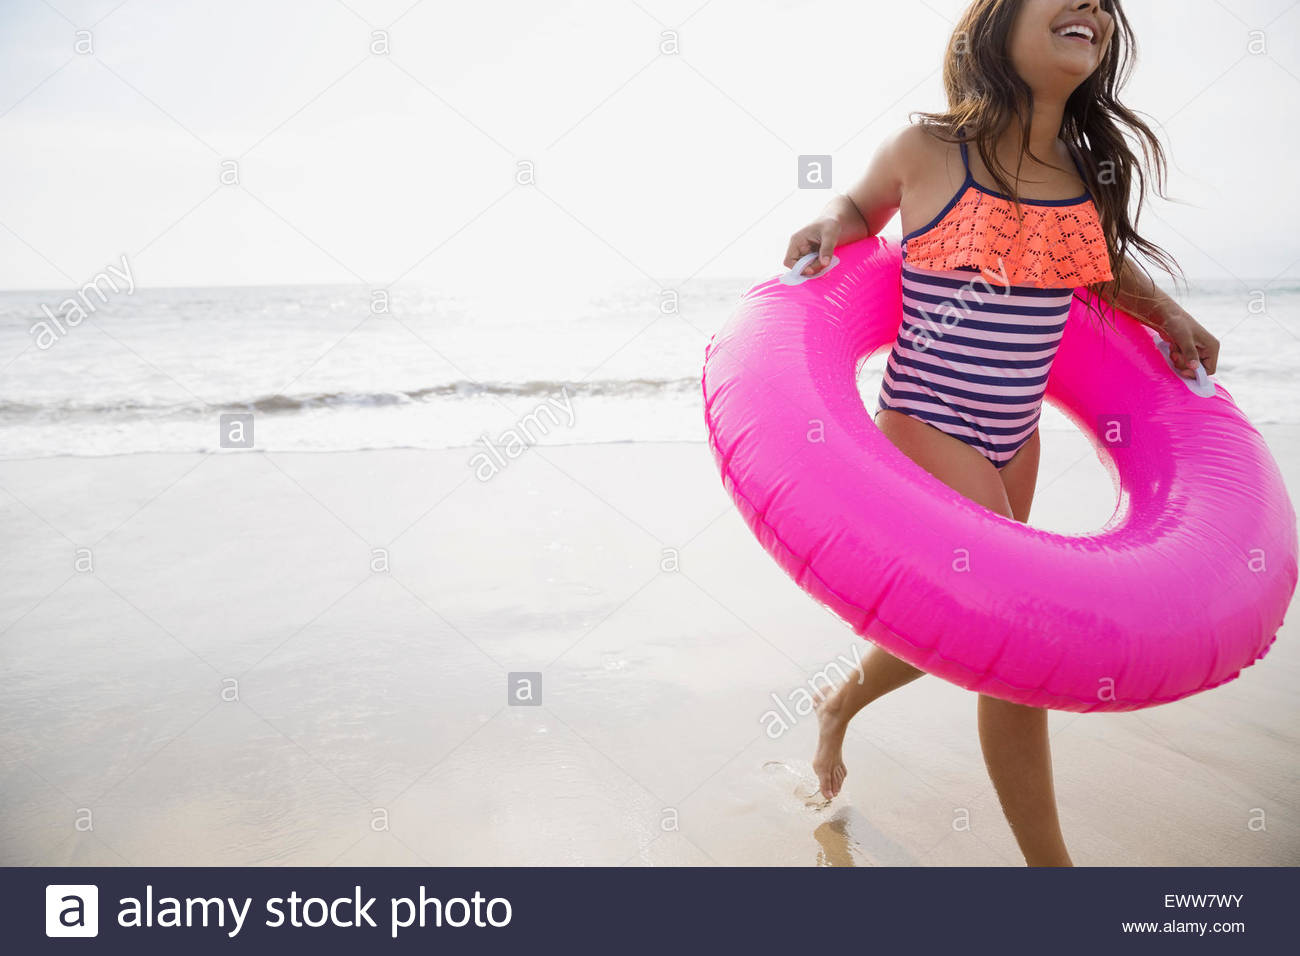 Girl running with pink inflatable ring on beach Stock Photo